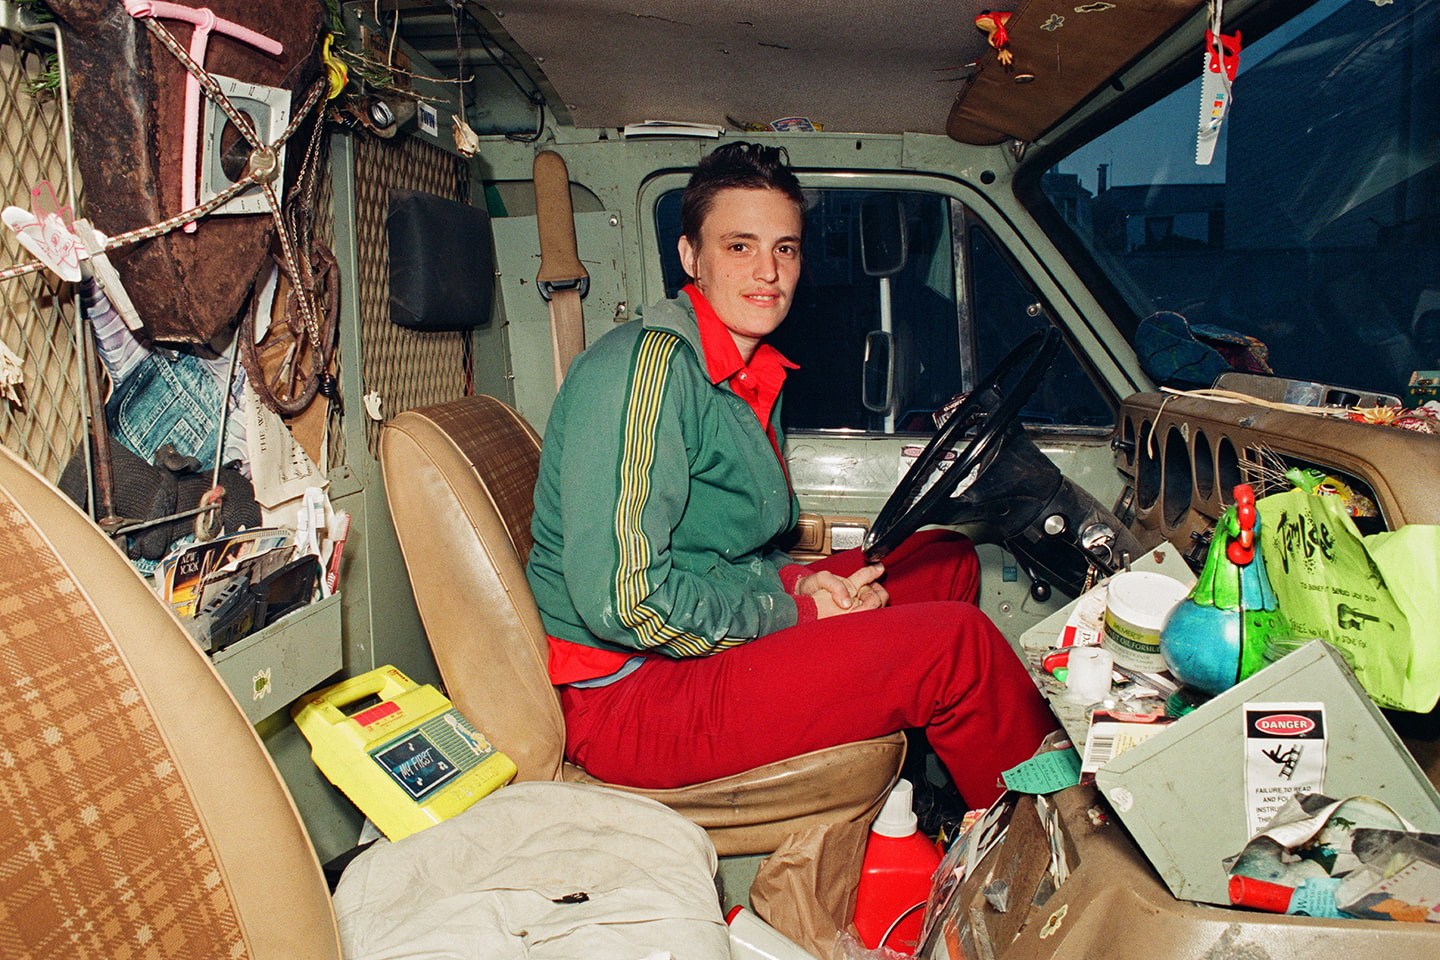 A person in red and green in the cab of a messy van.